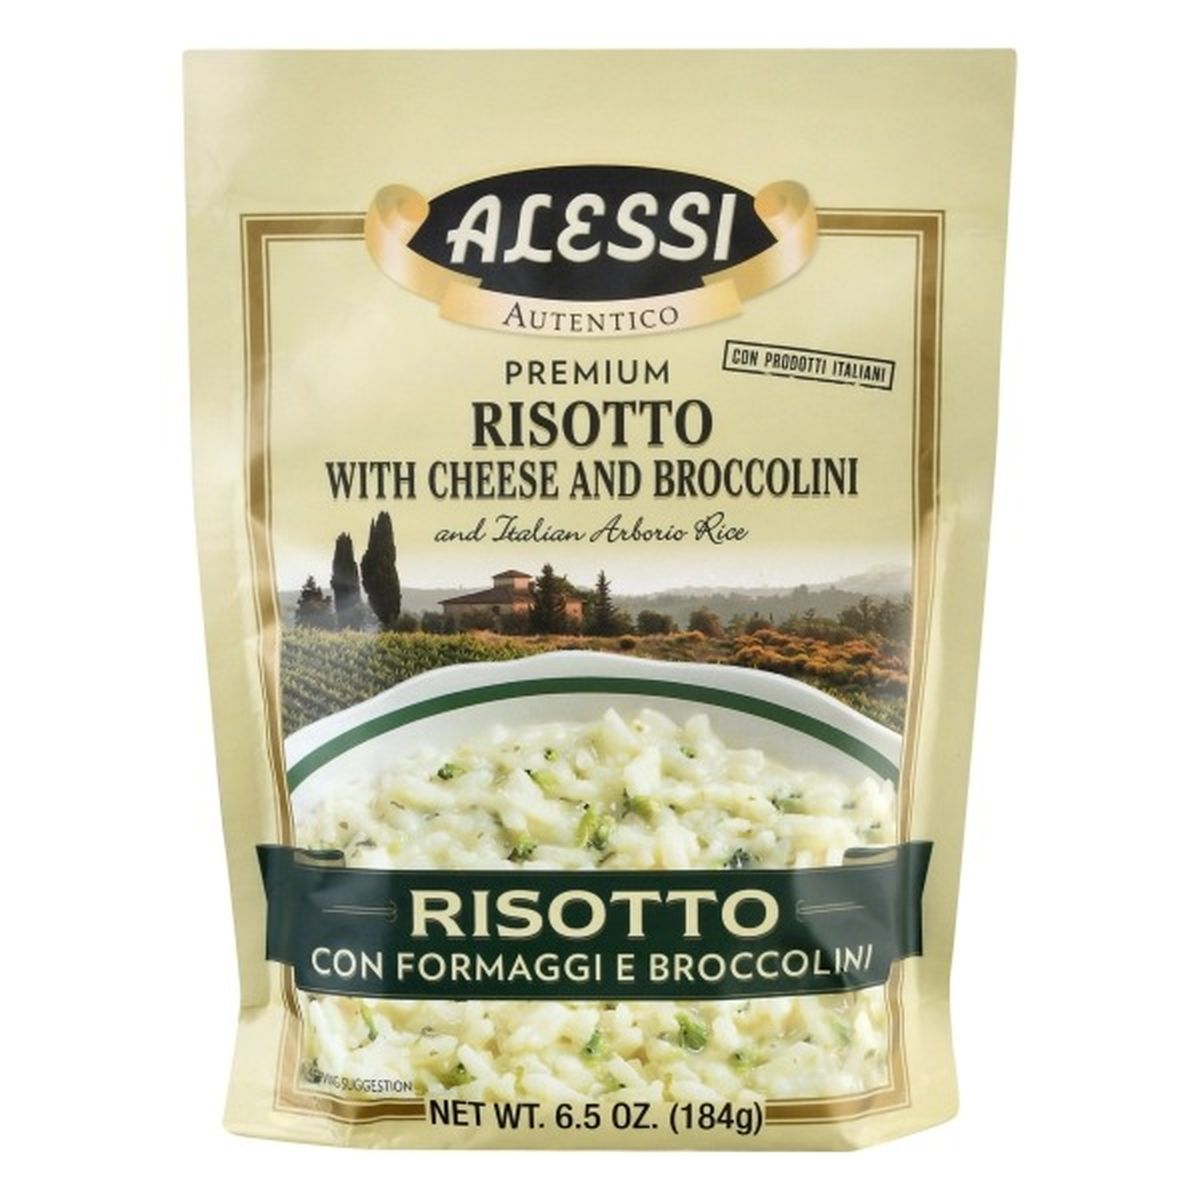 Calories in Alessi Risotto, With Cheese And Broccolini, Premium